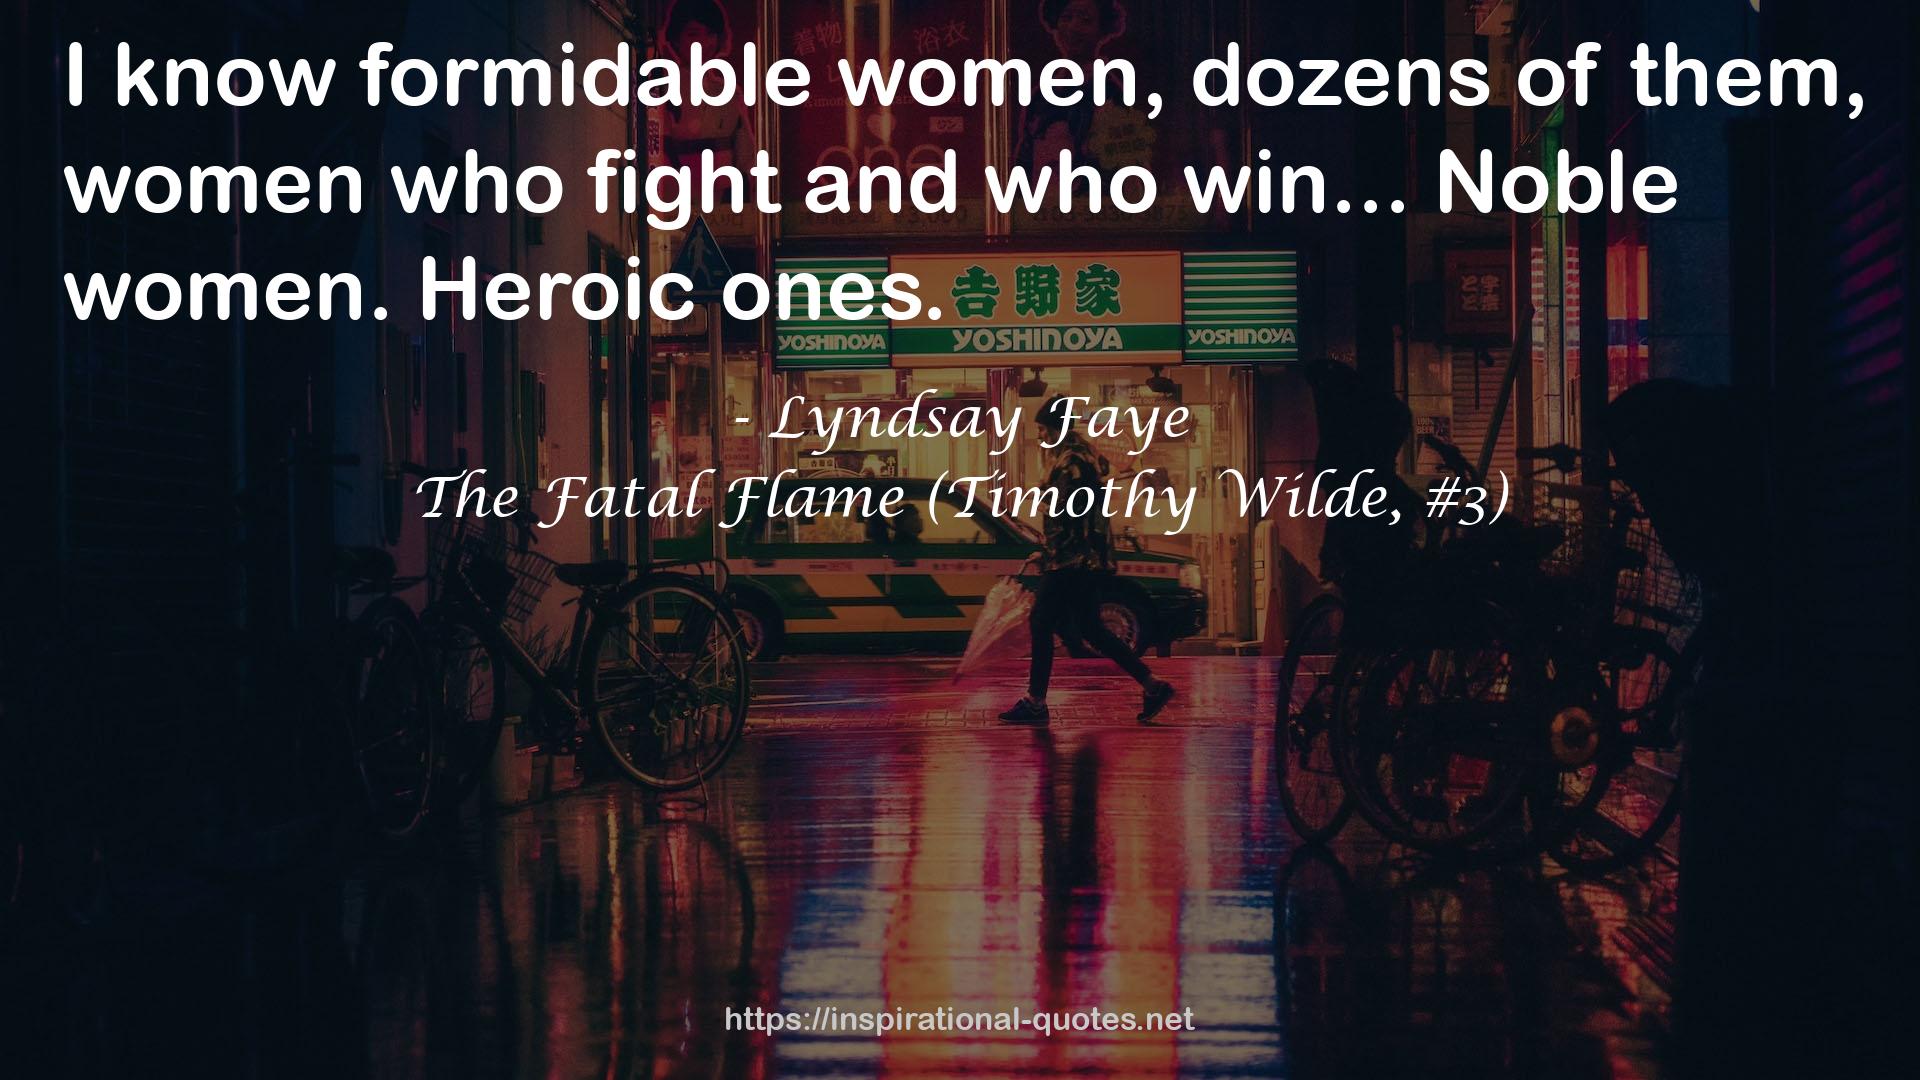 The Fatal Flame (Timothy Wilde, #3) QUOTES